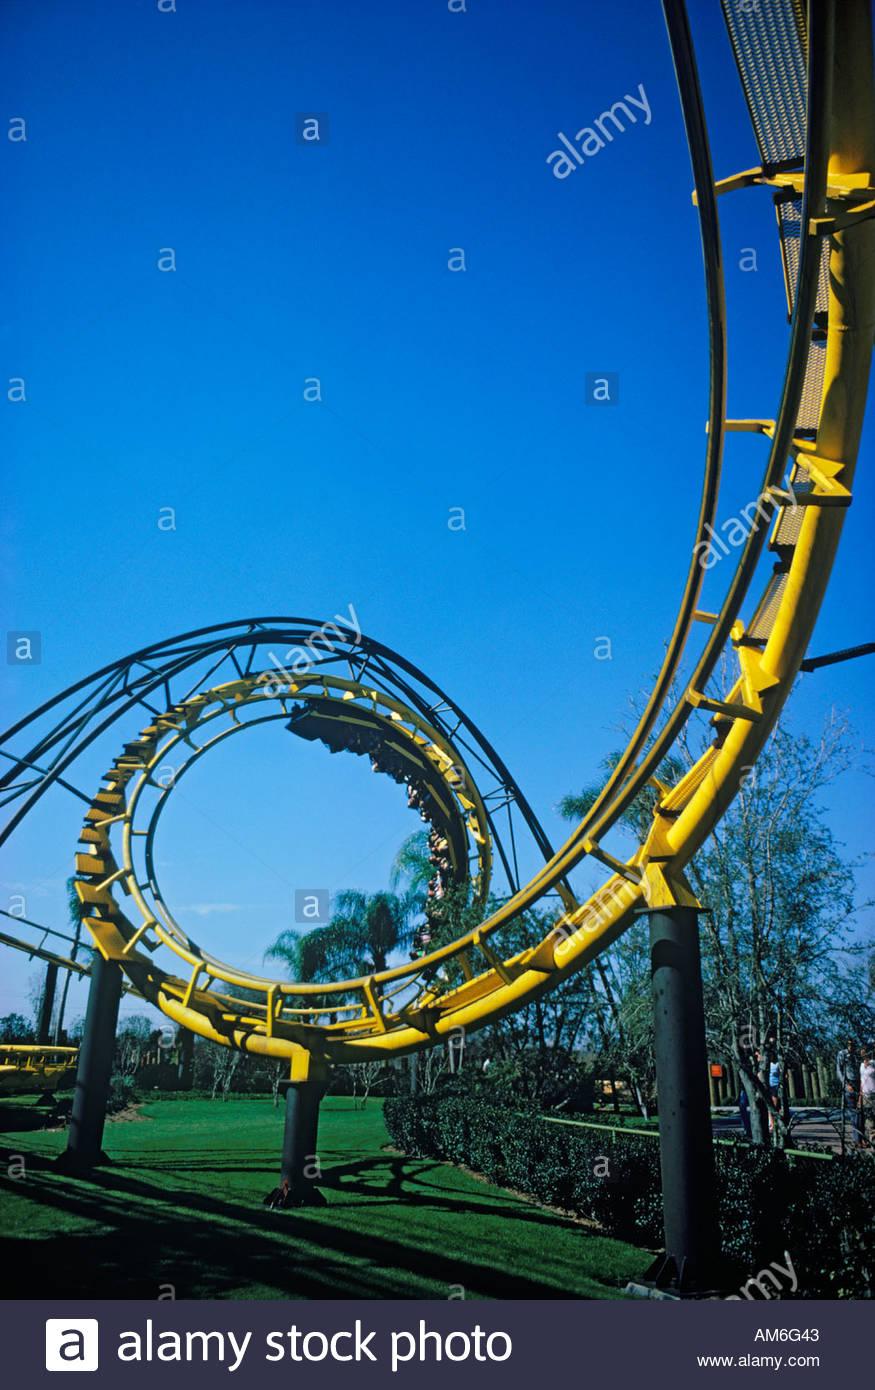 The Python Rollercoaster At Busch Gardens Amusement Park At Tampa